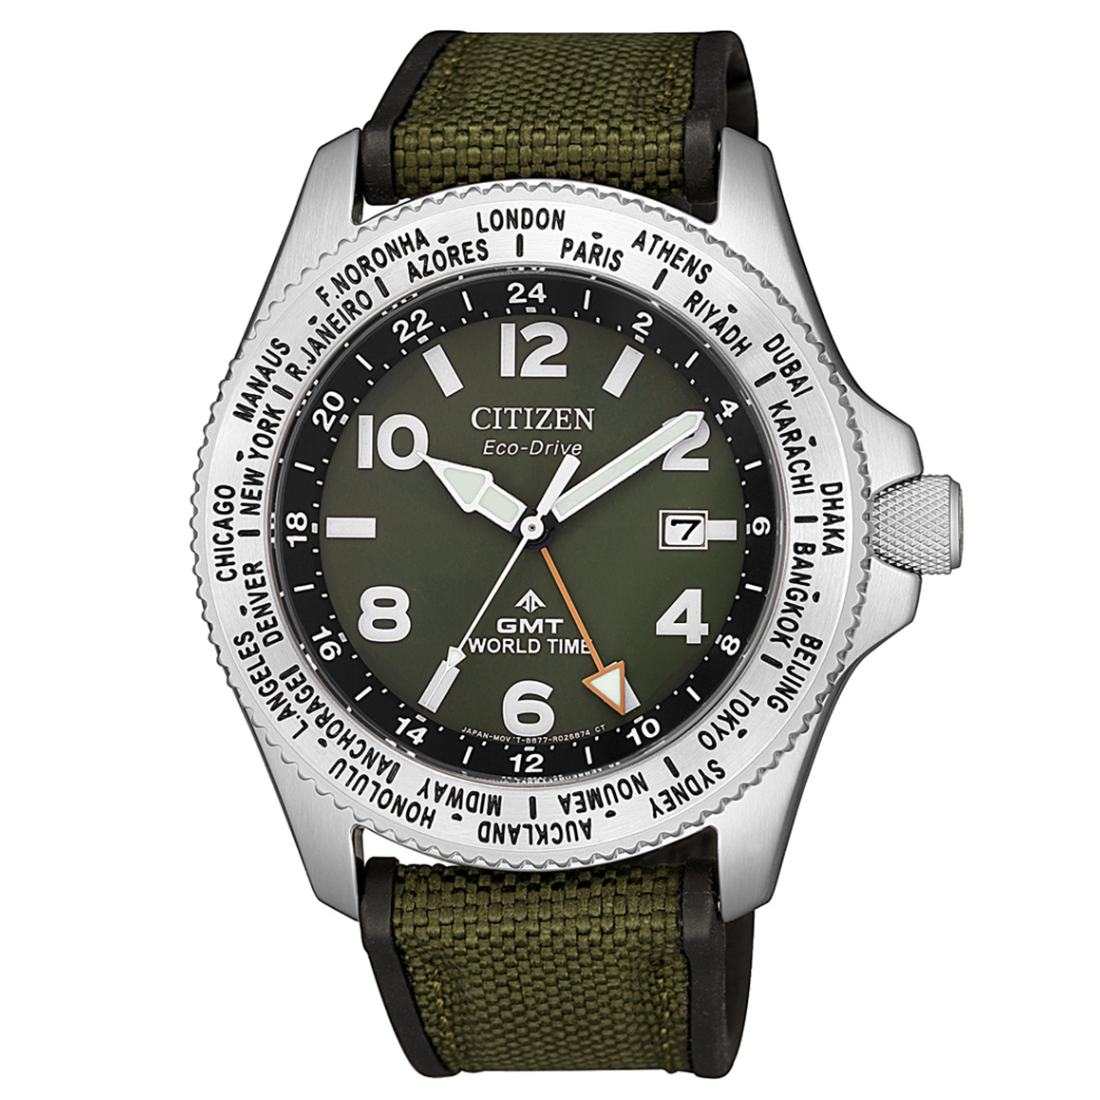 Citizen Promaster GMT Land BJ7100-23X Eco-Drive Green Dial Watch